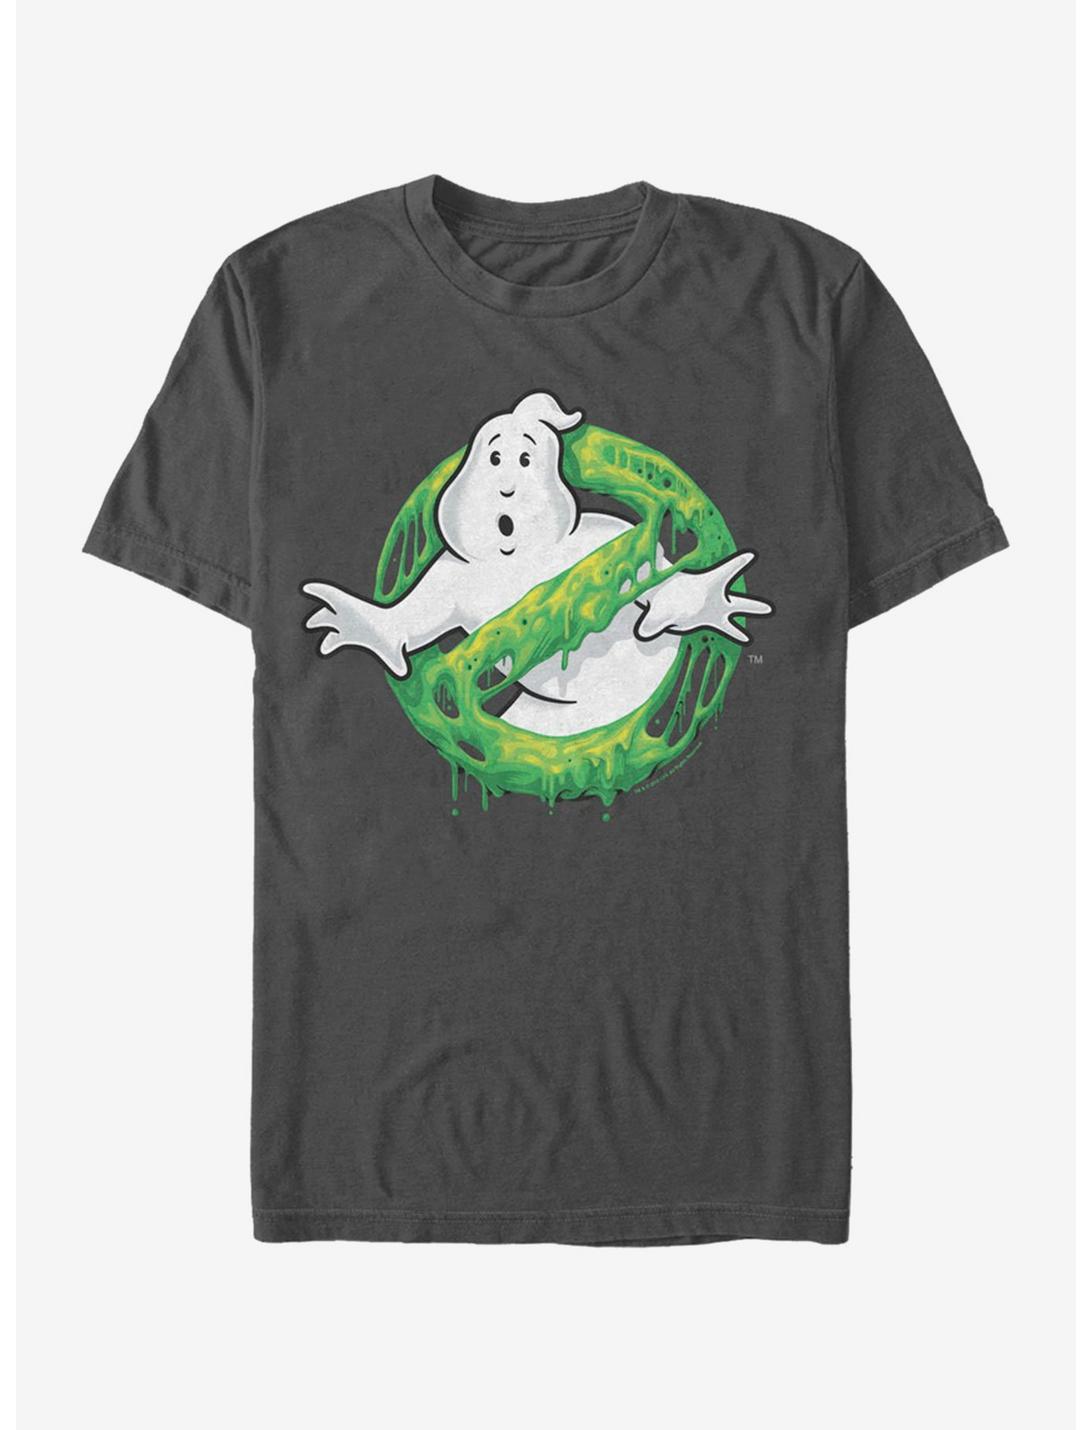 Ghostbusters Ghost Logo Green Slime T-Shirt, CHARCOAL, hi-res